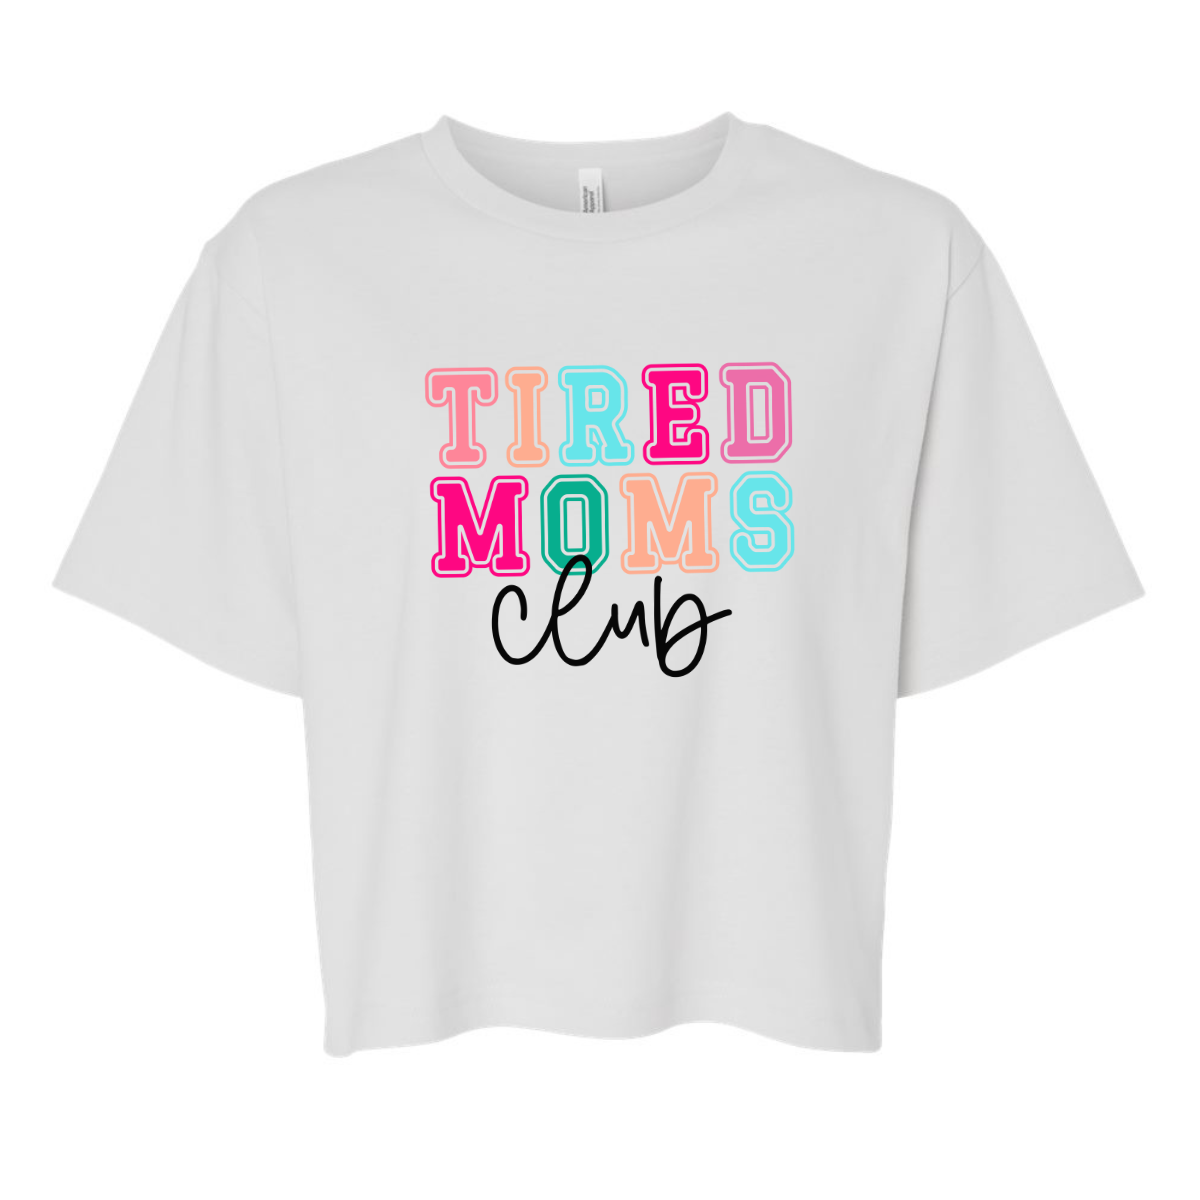 Tired Moms Club